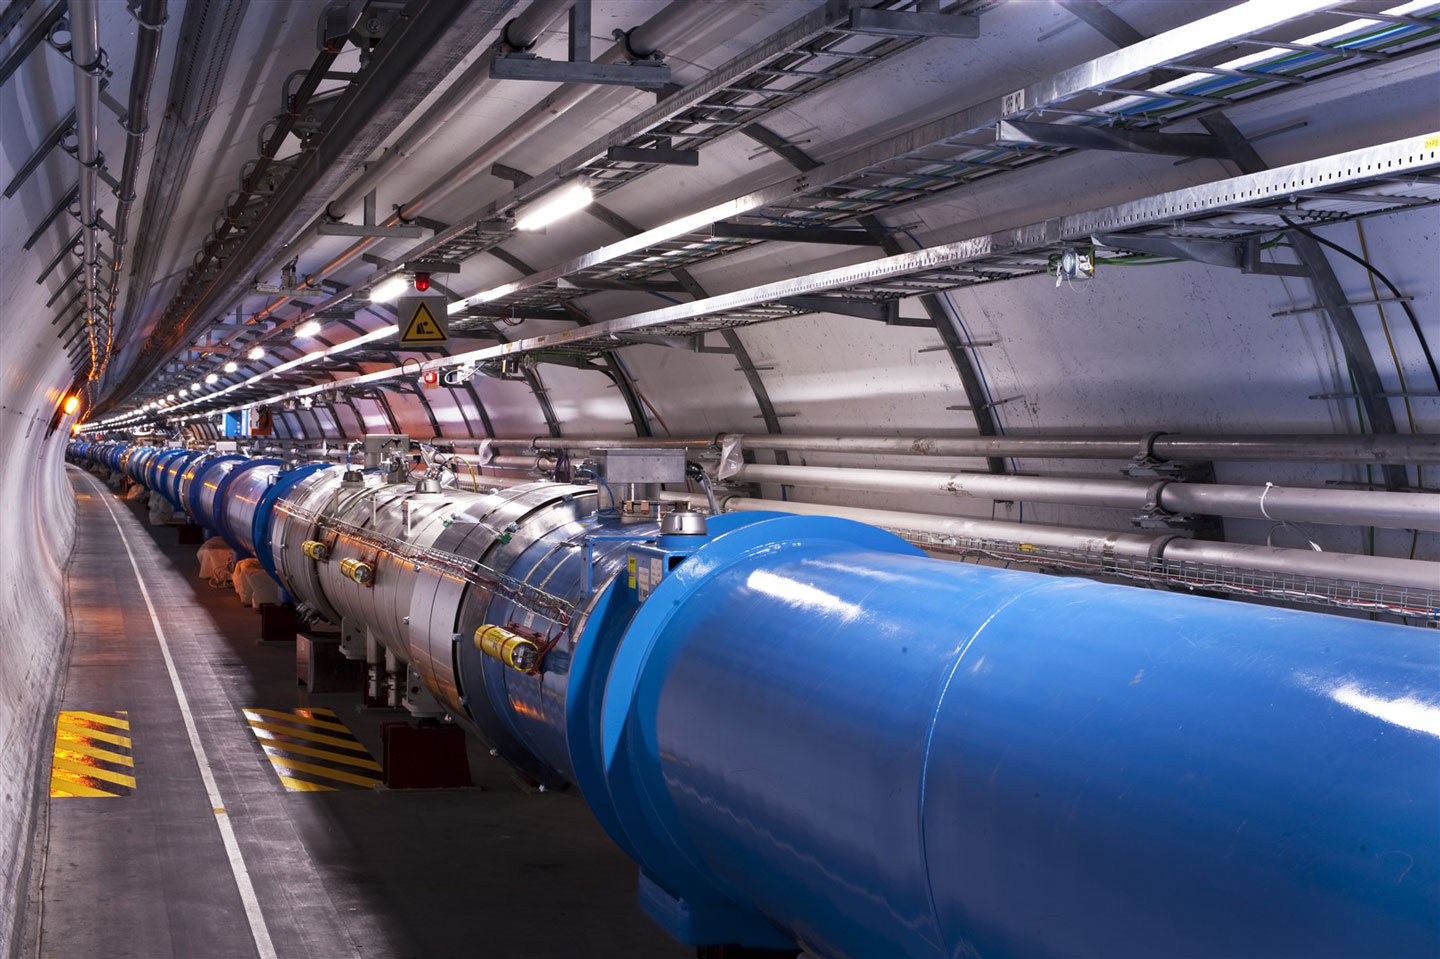 LHC completes proton run for 2015, preps for lead